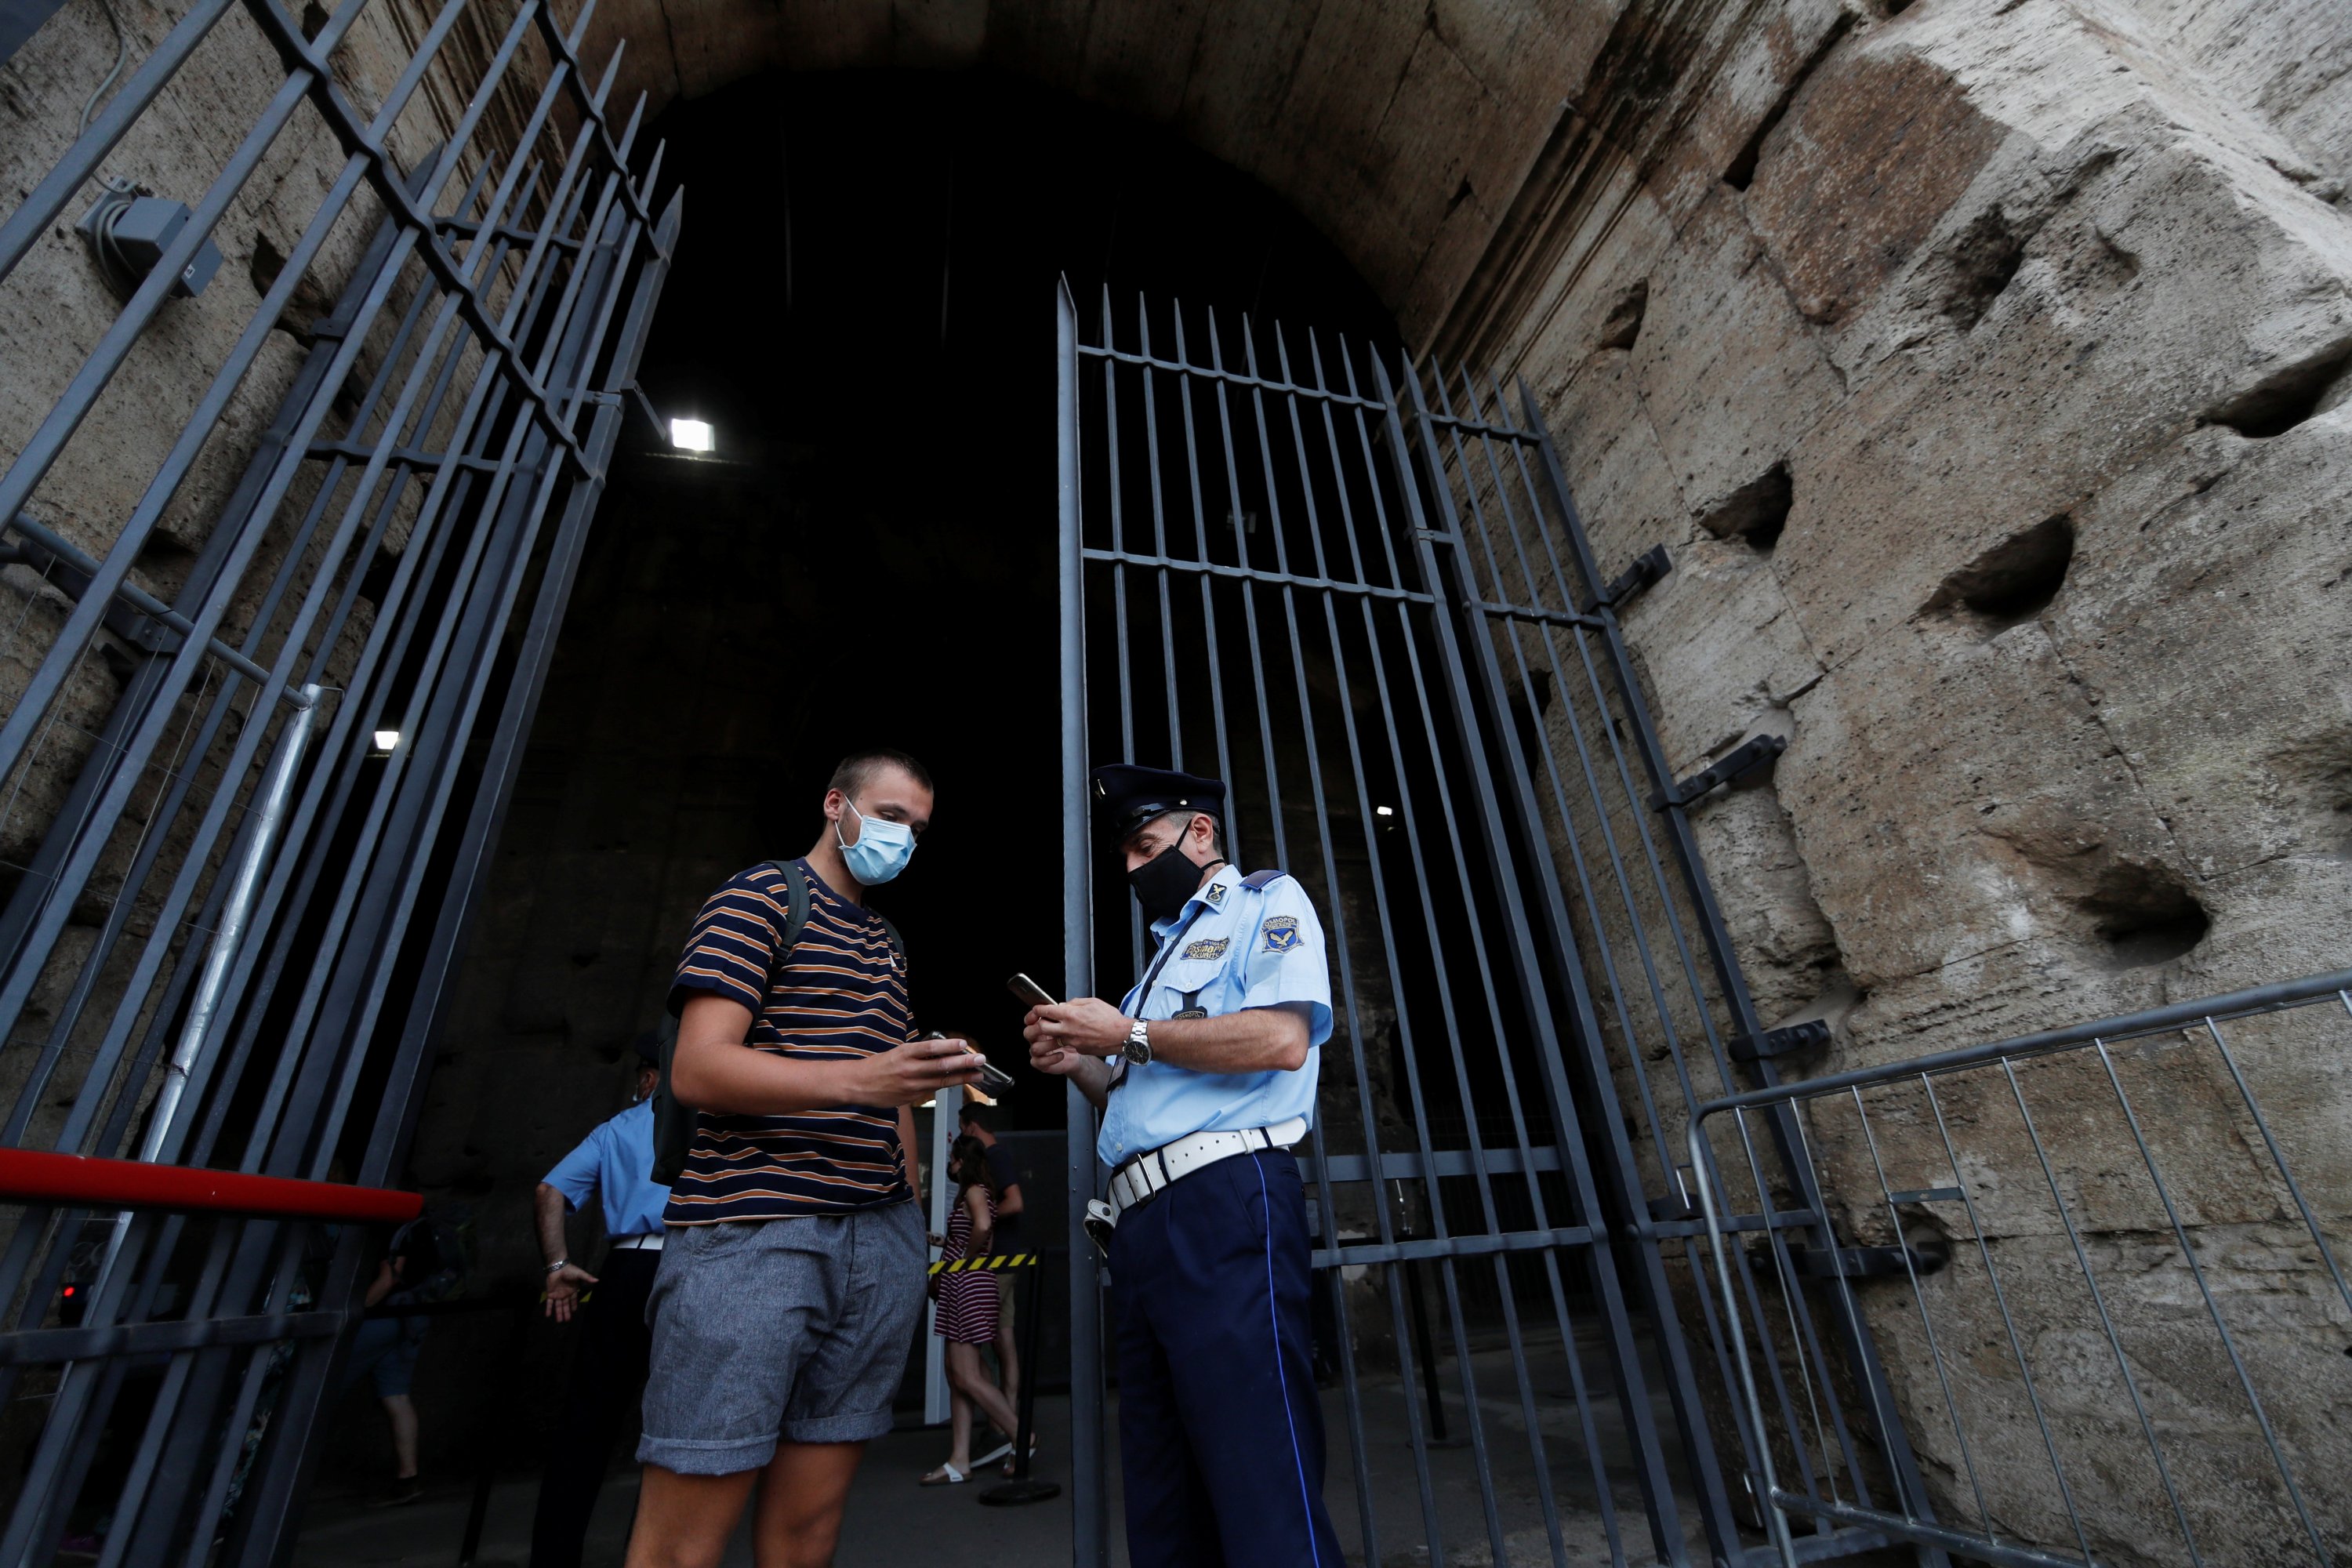 A tourist shows his "Green Pass," a document showing proof of COVID-19 immunity, as he enters the Colosseum, in Rome, Italy, Sept. 16, 2021. (Reuters Photo)